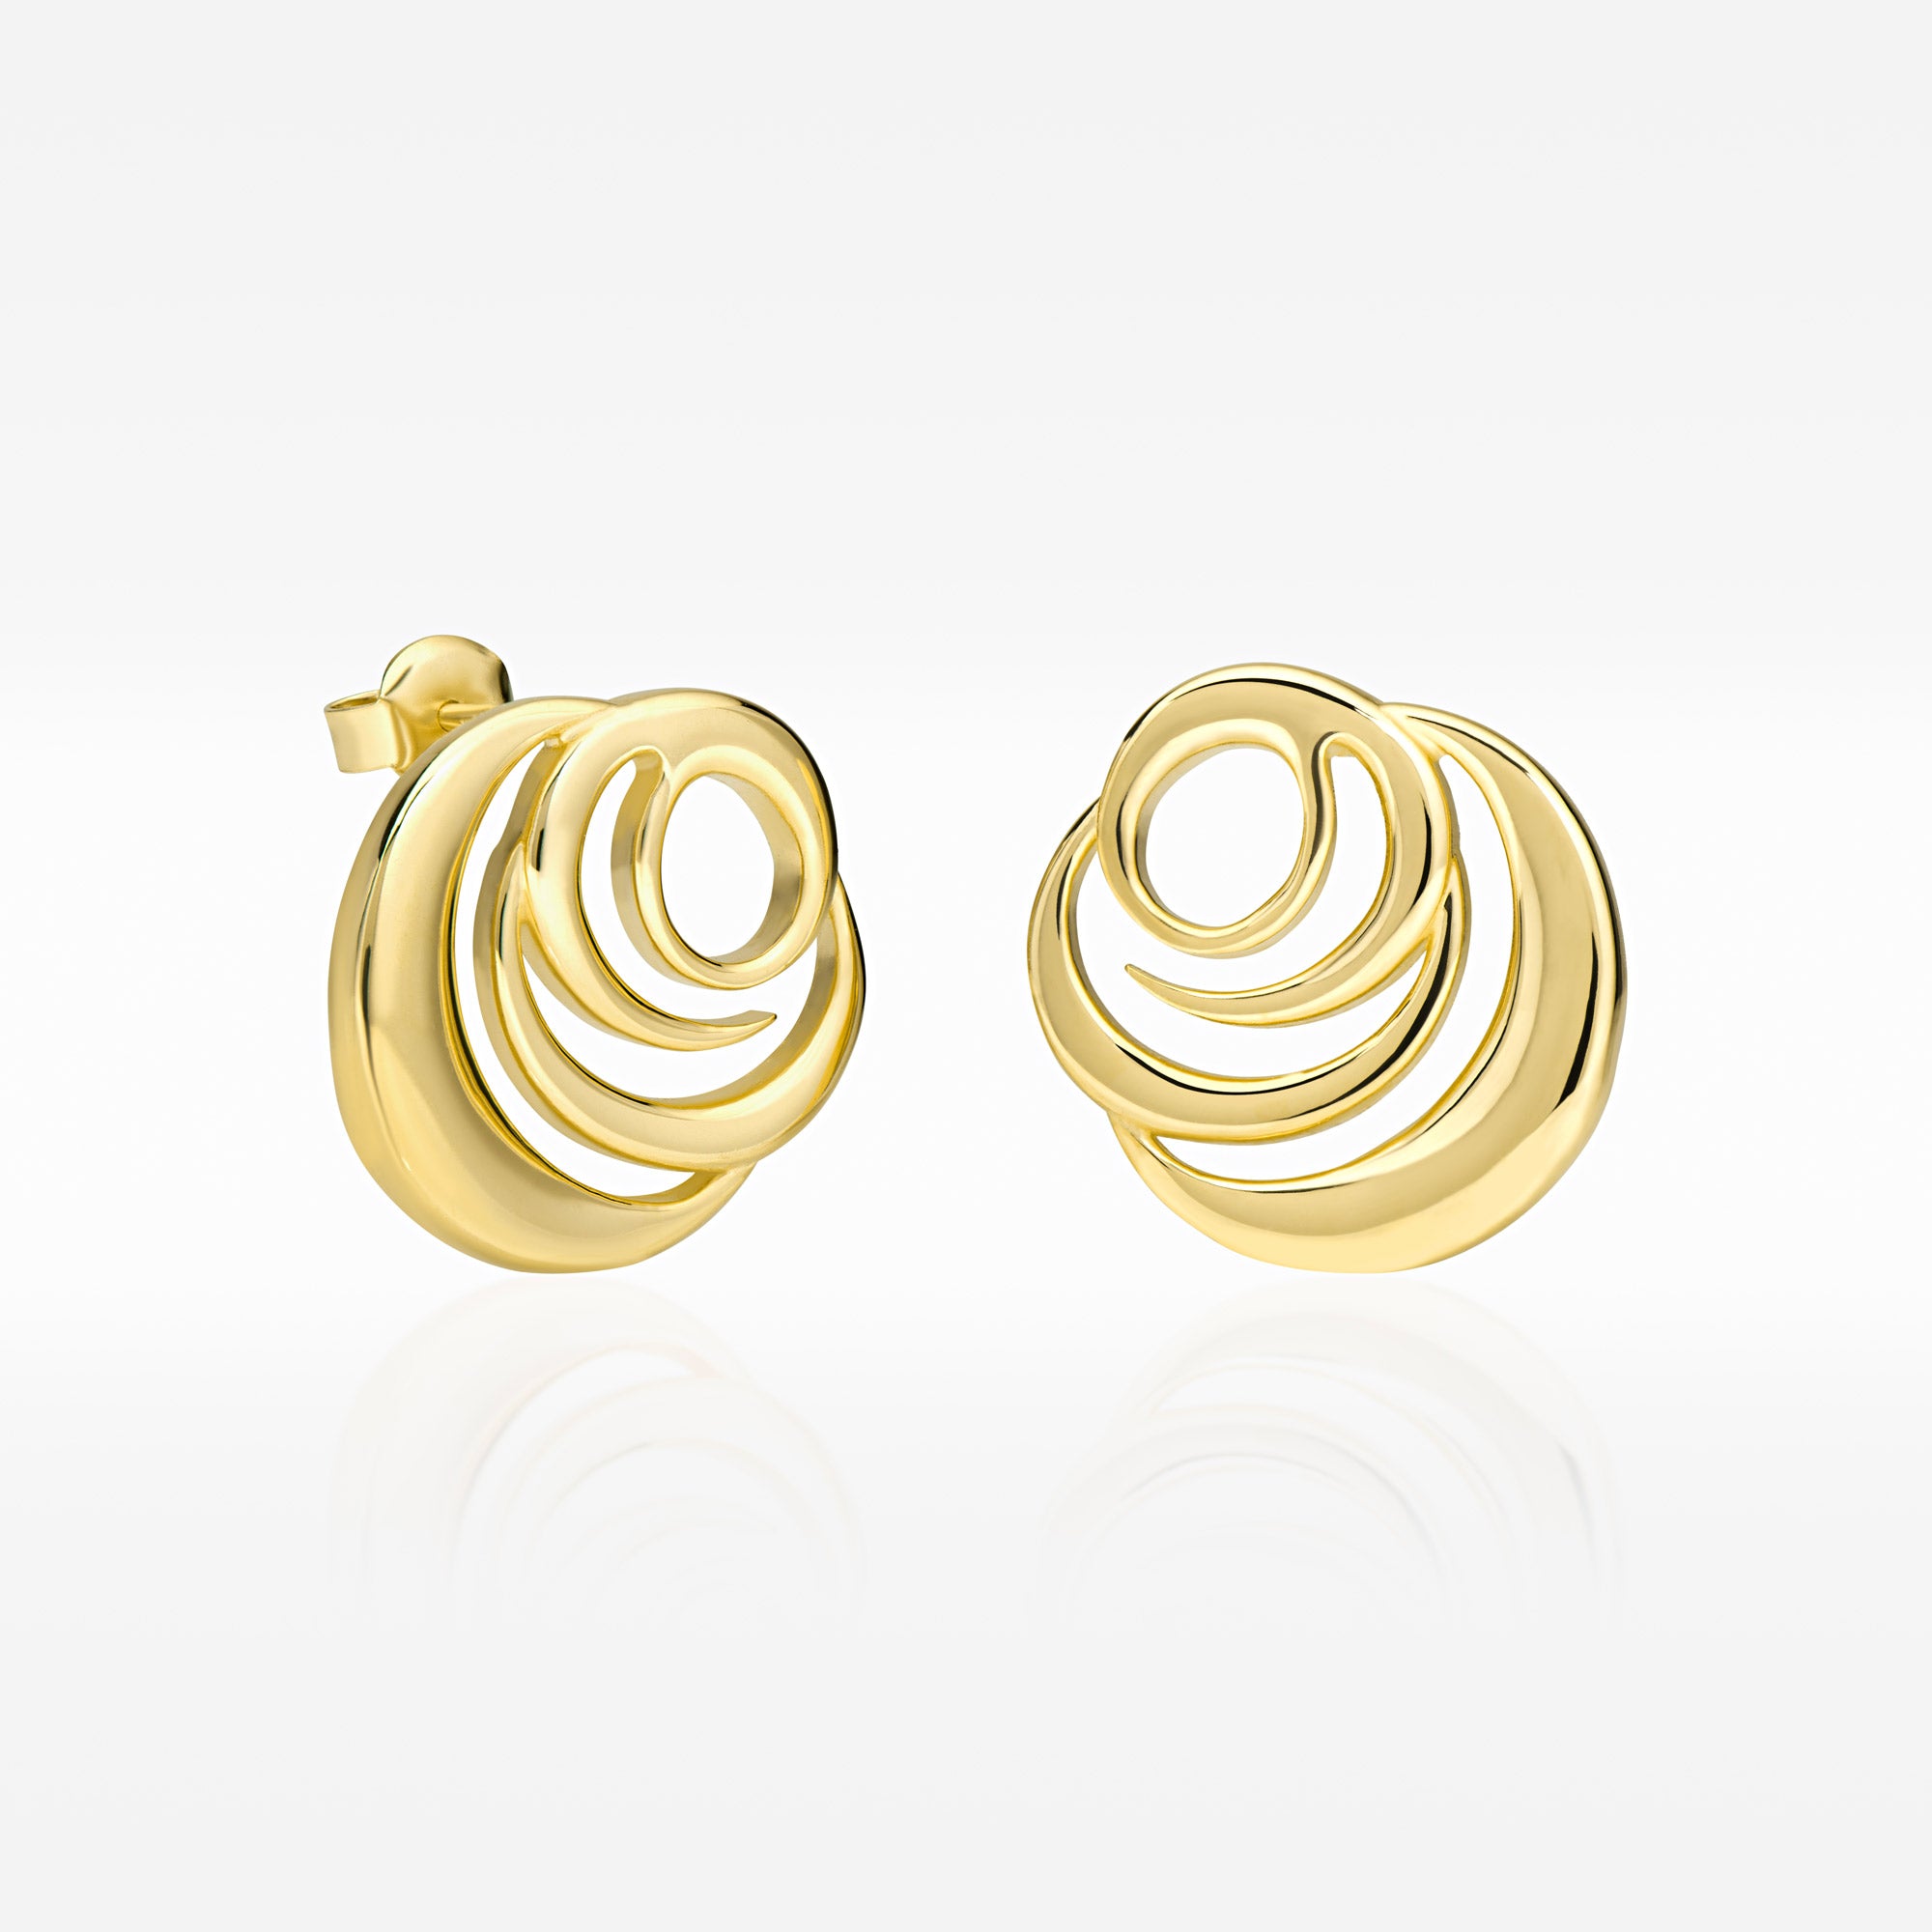 Roses Muse - 18k Gold Vermeil Jewelry